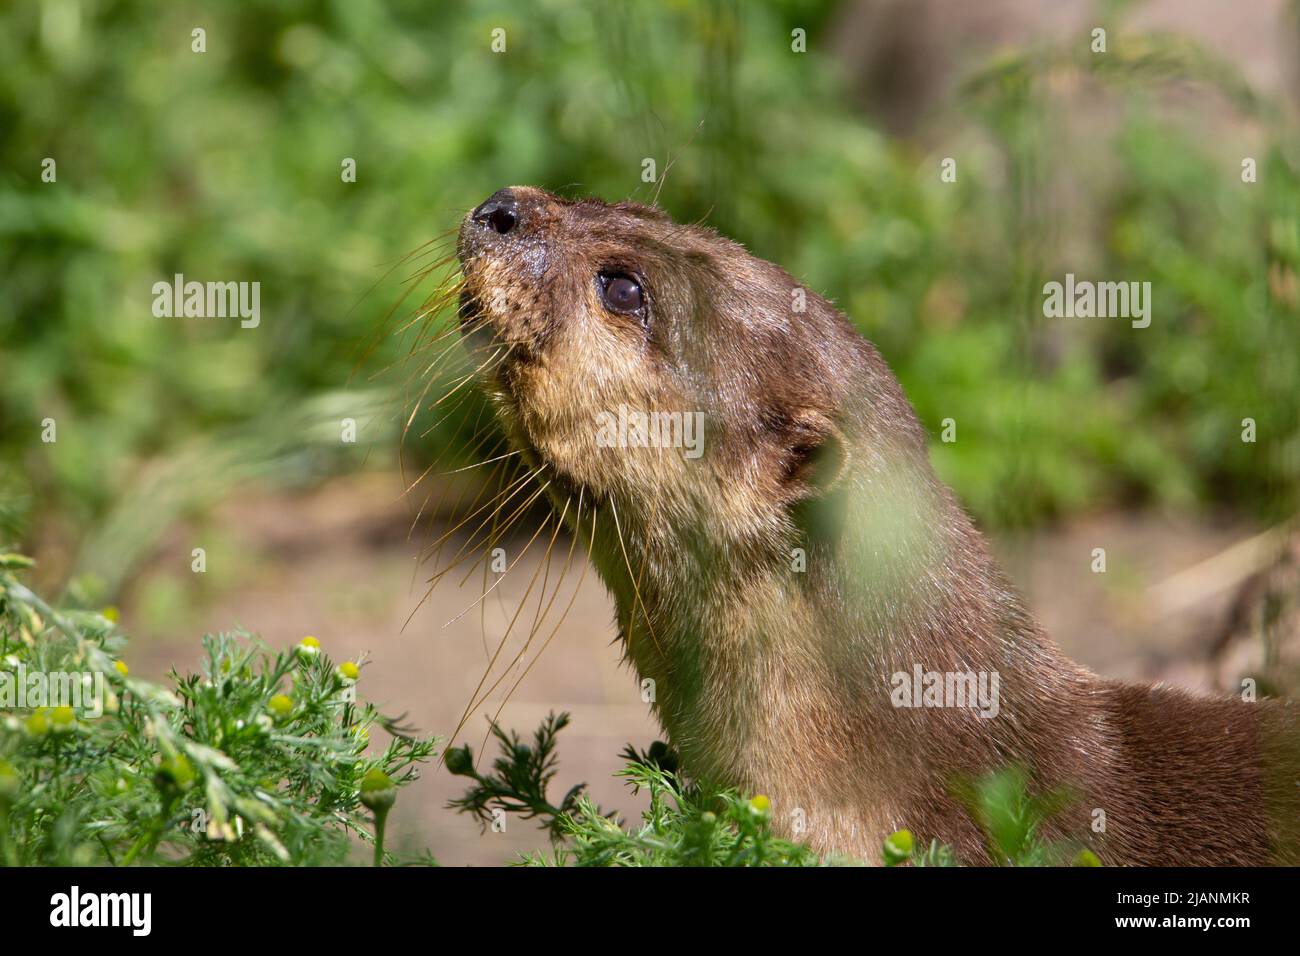 young otter looking up with a natural green background Stock Photo